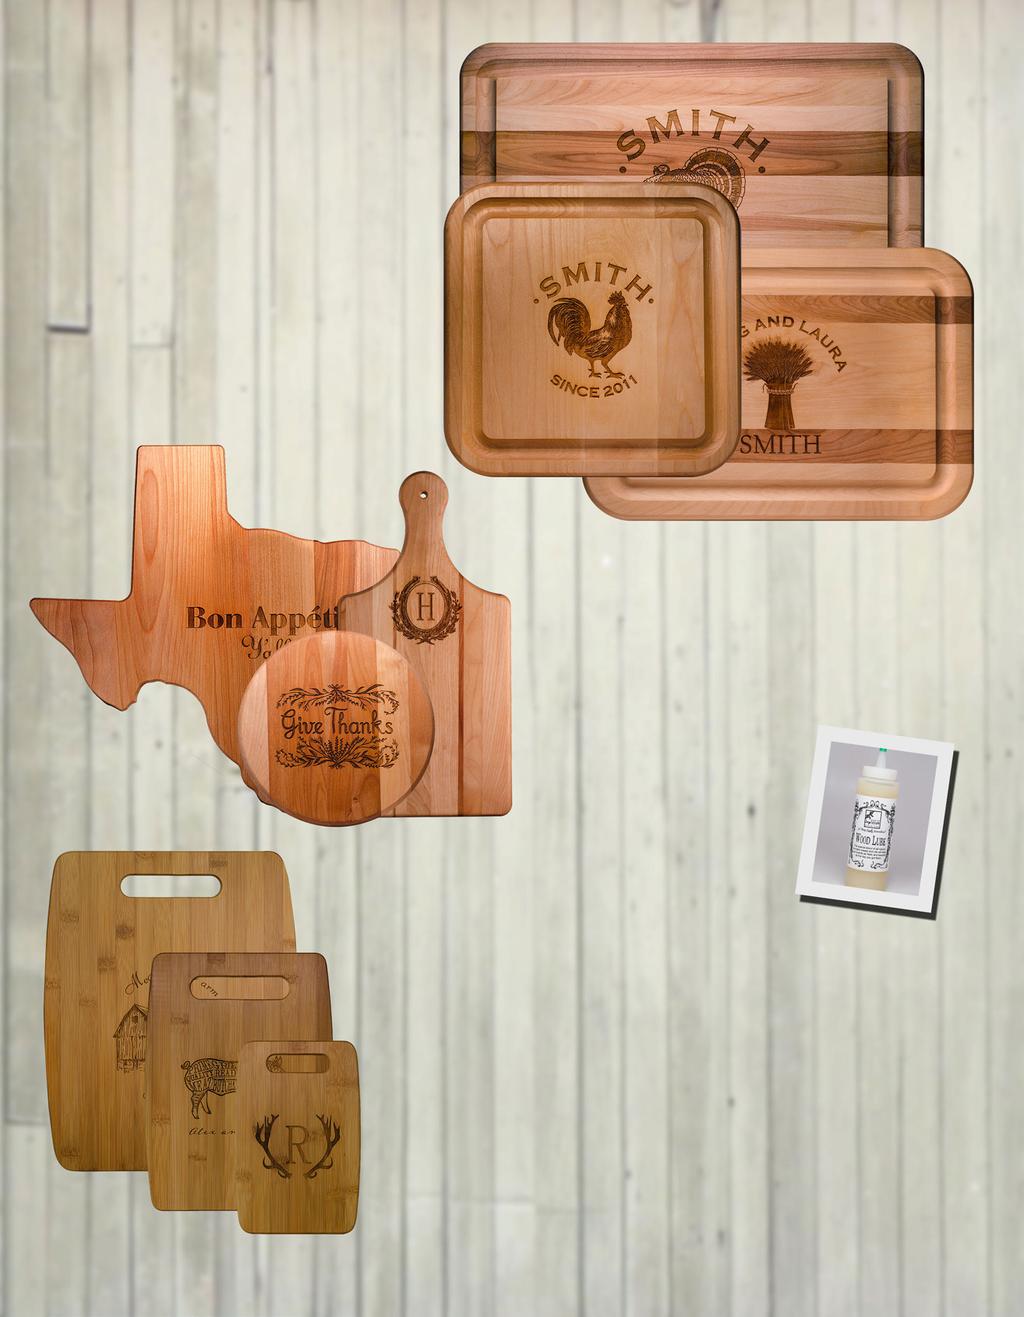 American Hardwood Serving Boards Small Board 12 x 12 x.75 inches thick, and has an impression size of 5.5 inches in the center and 2.5 inches on the bottom right. Medium Board 16 x 11 x.